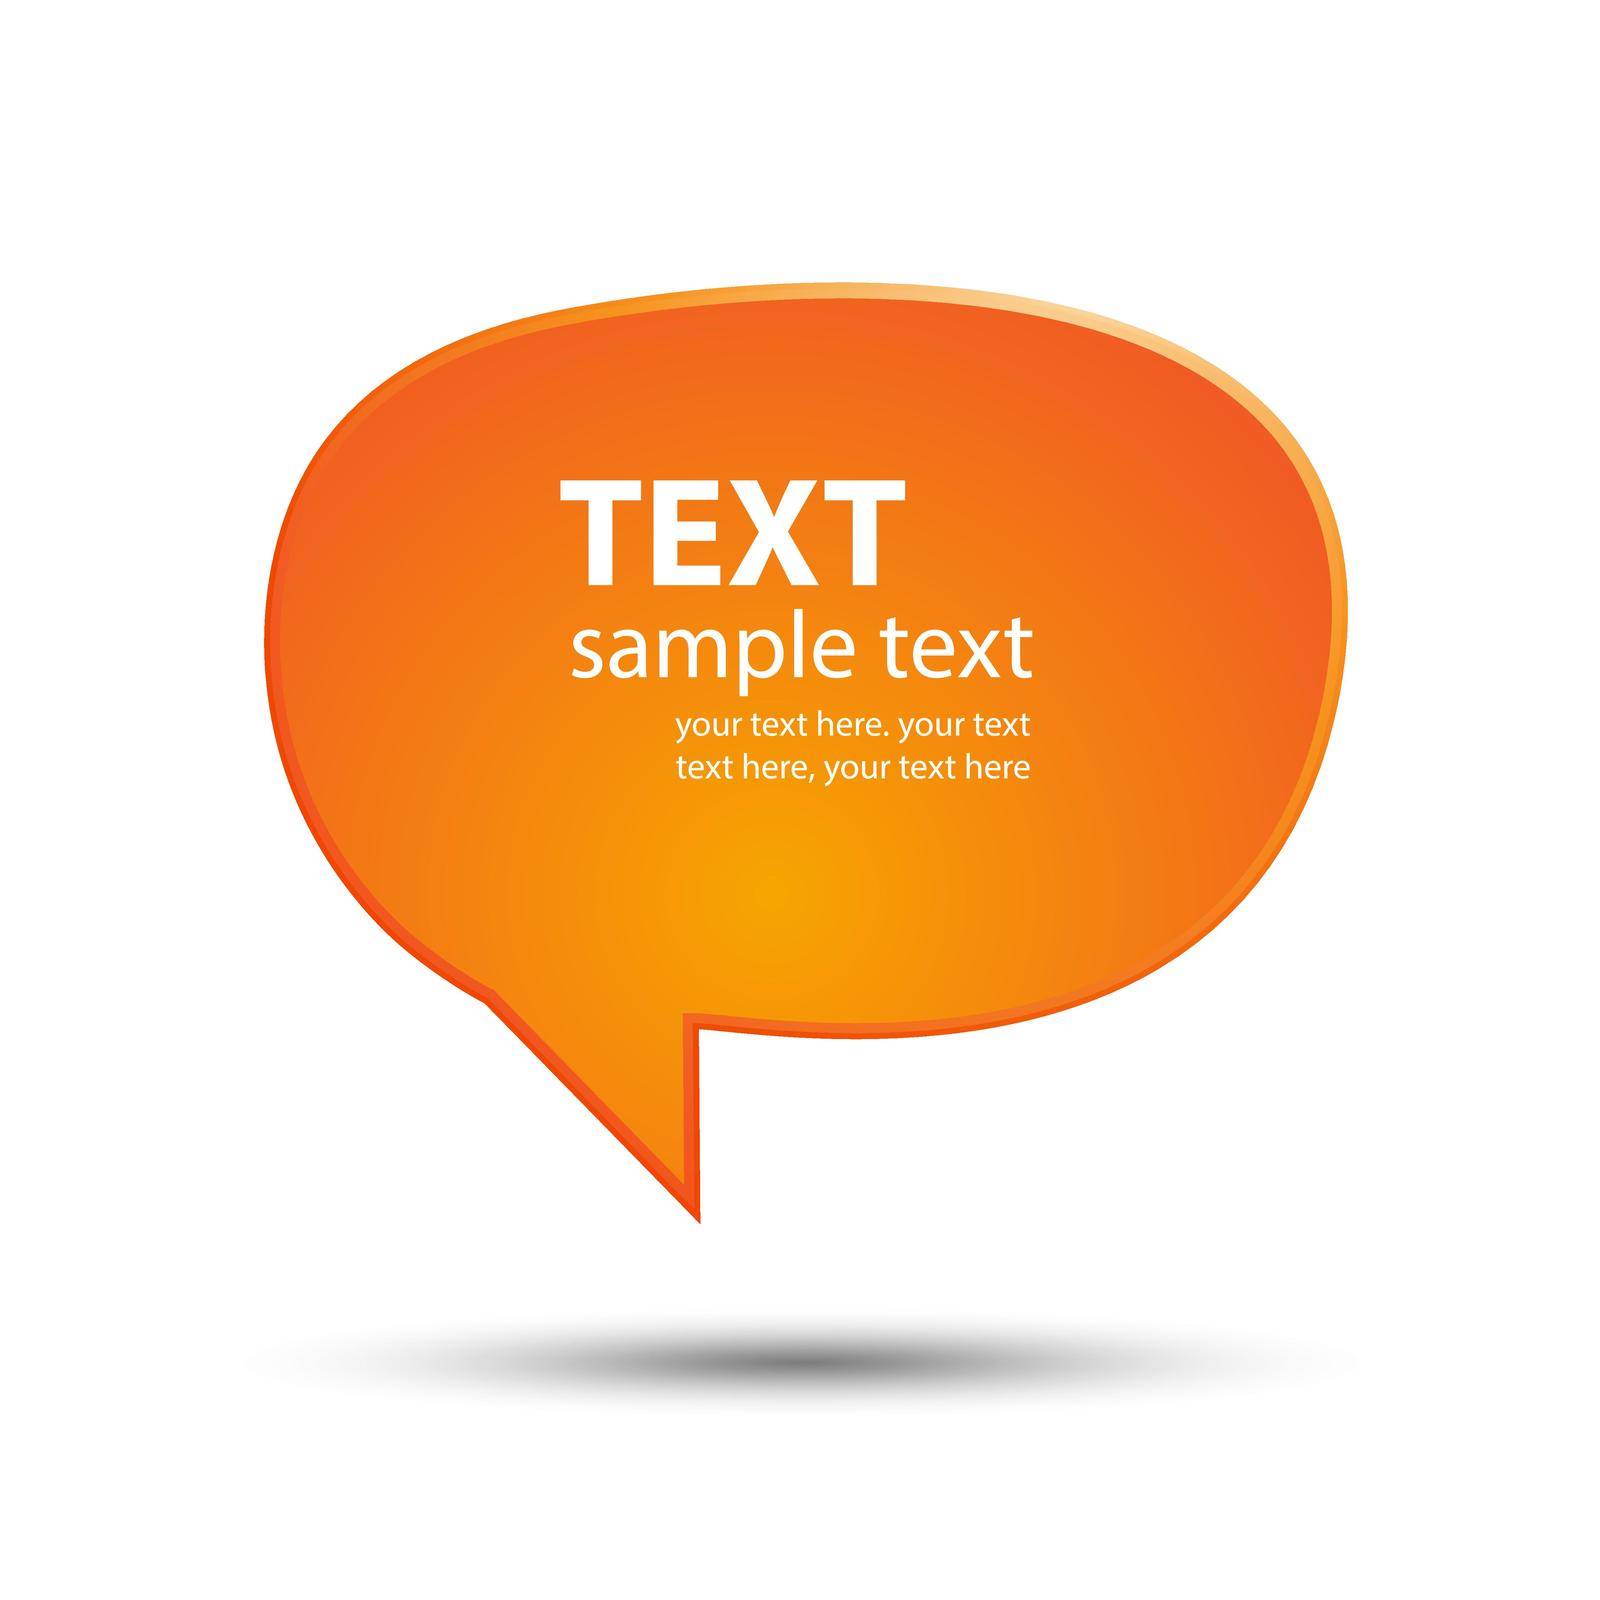 Speech bubbles for text in bright colors. A vector illustration.